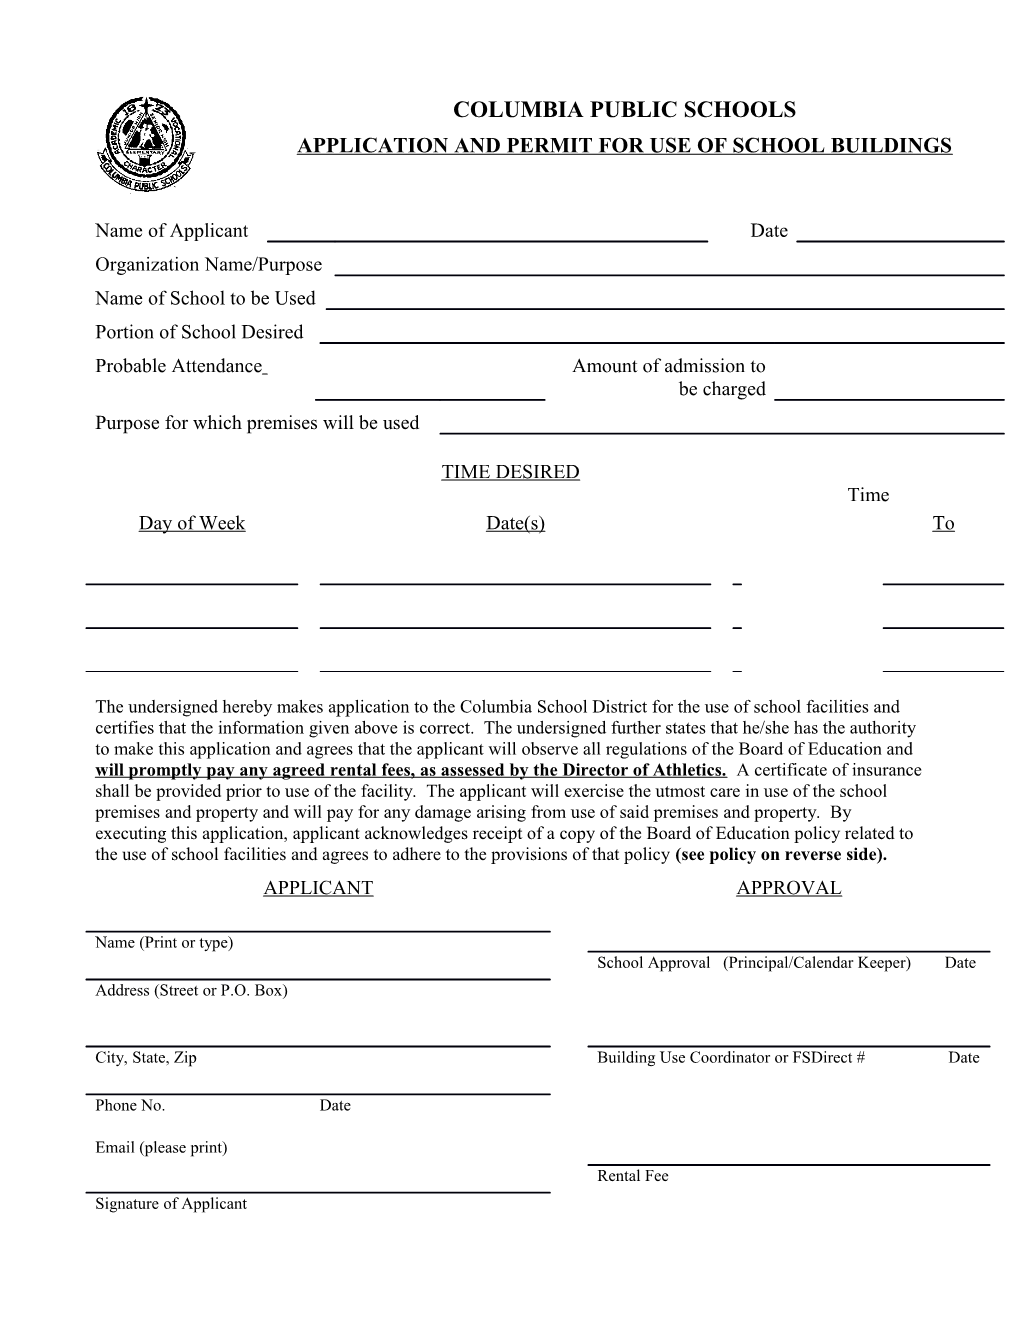 Application and Permit for Use of School Building